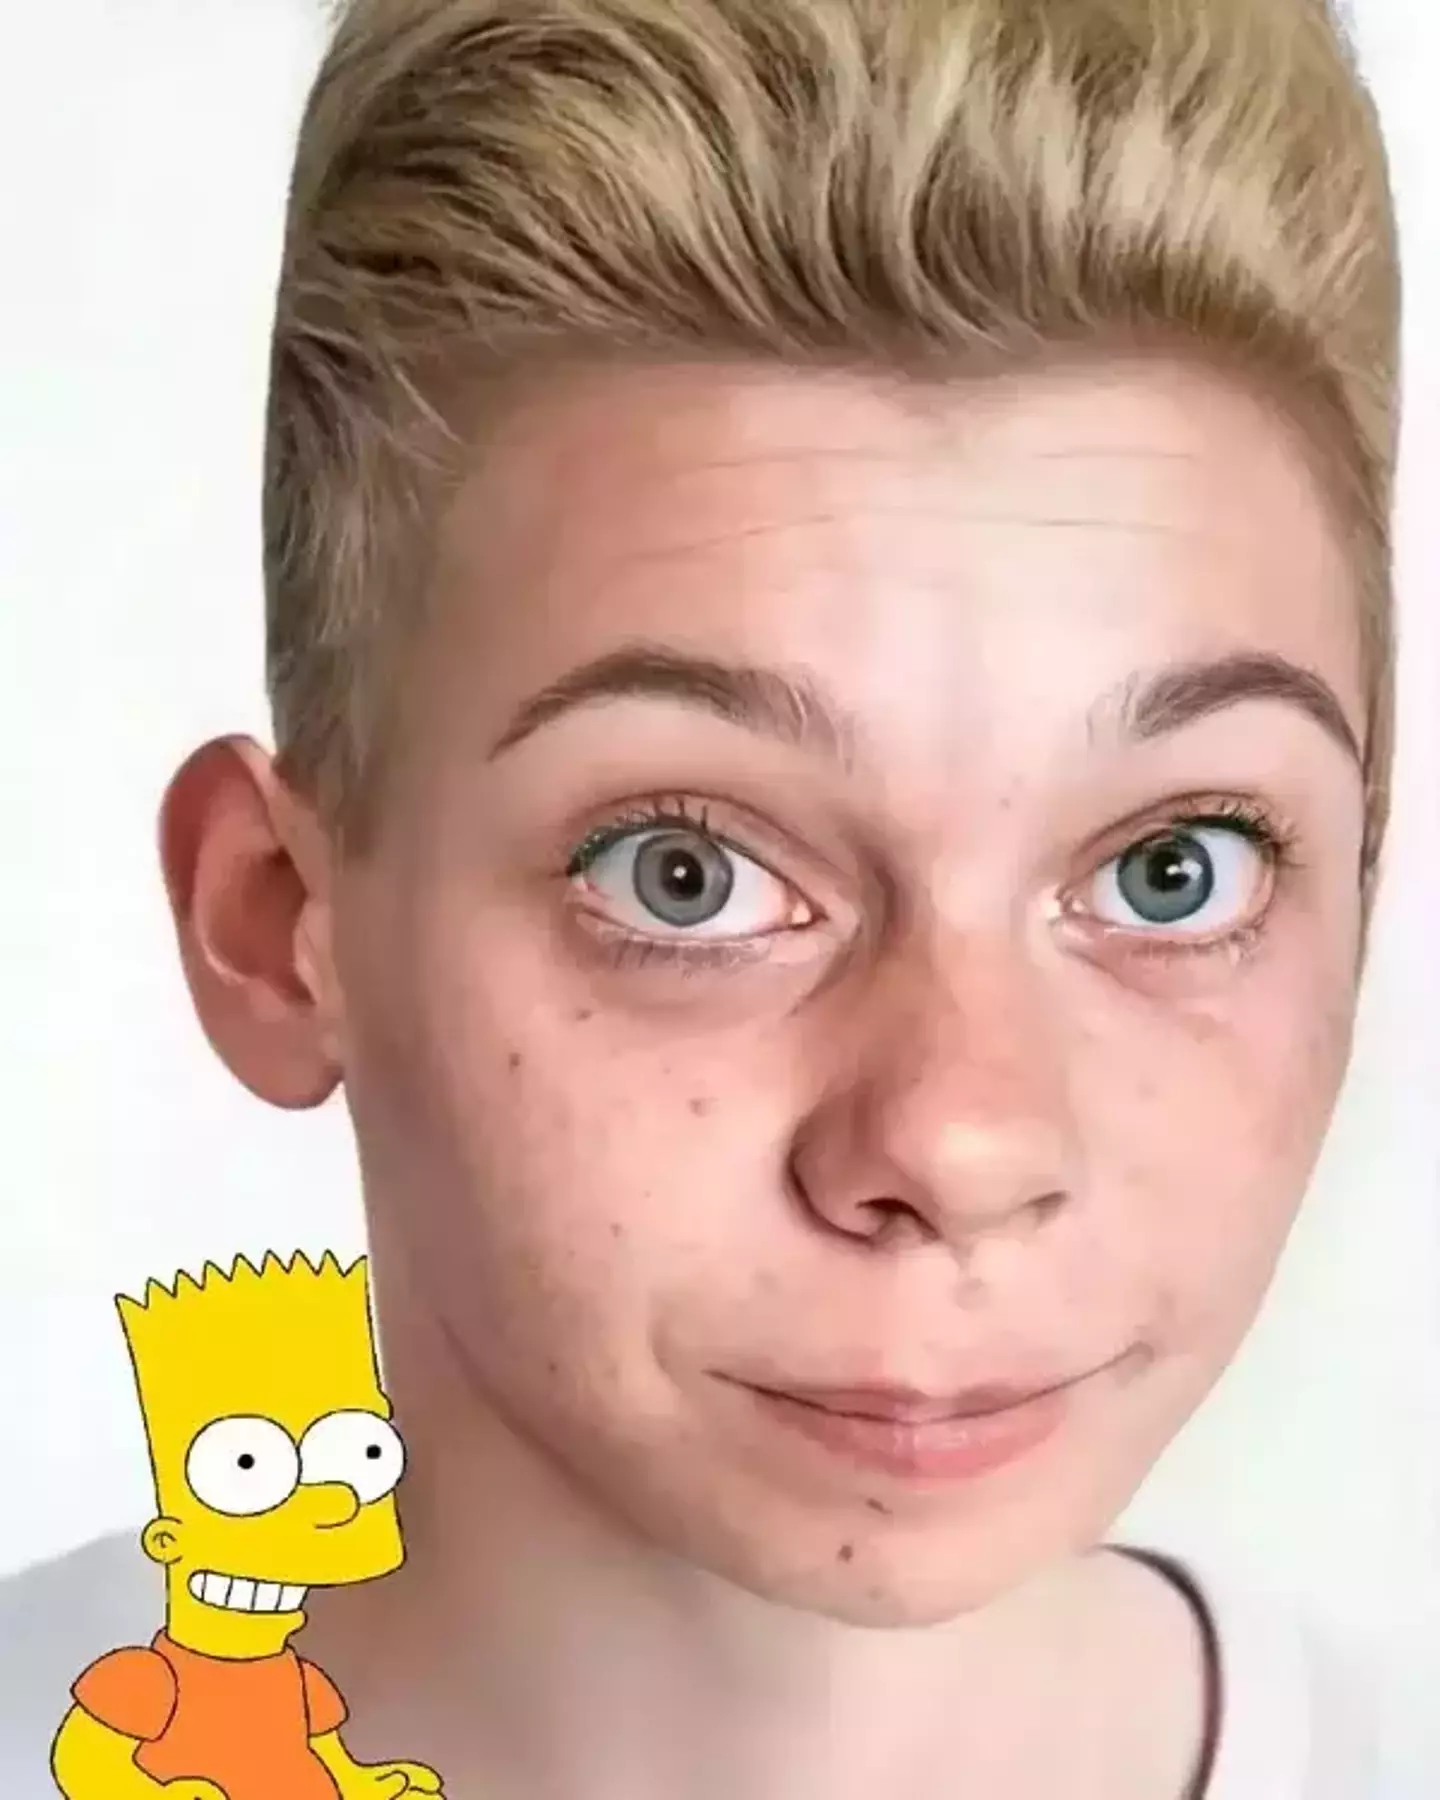 This is how Bart Simpson would look if he were real. (Instagram/@hidreley)